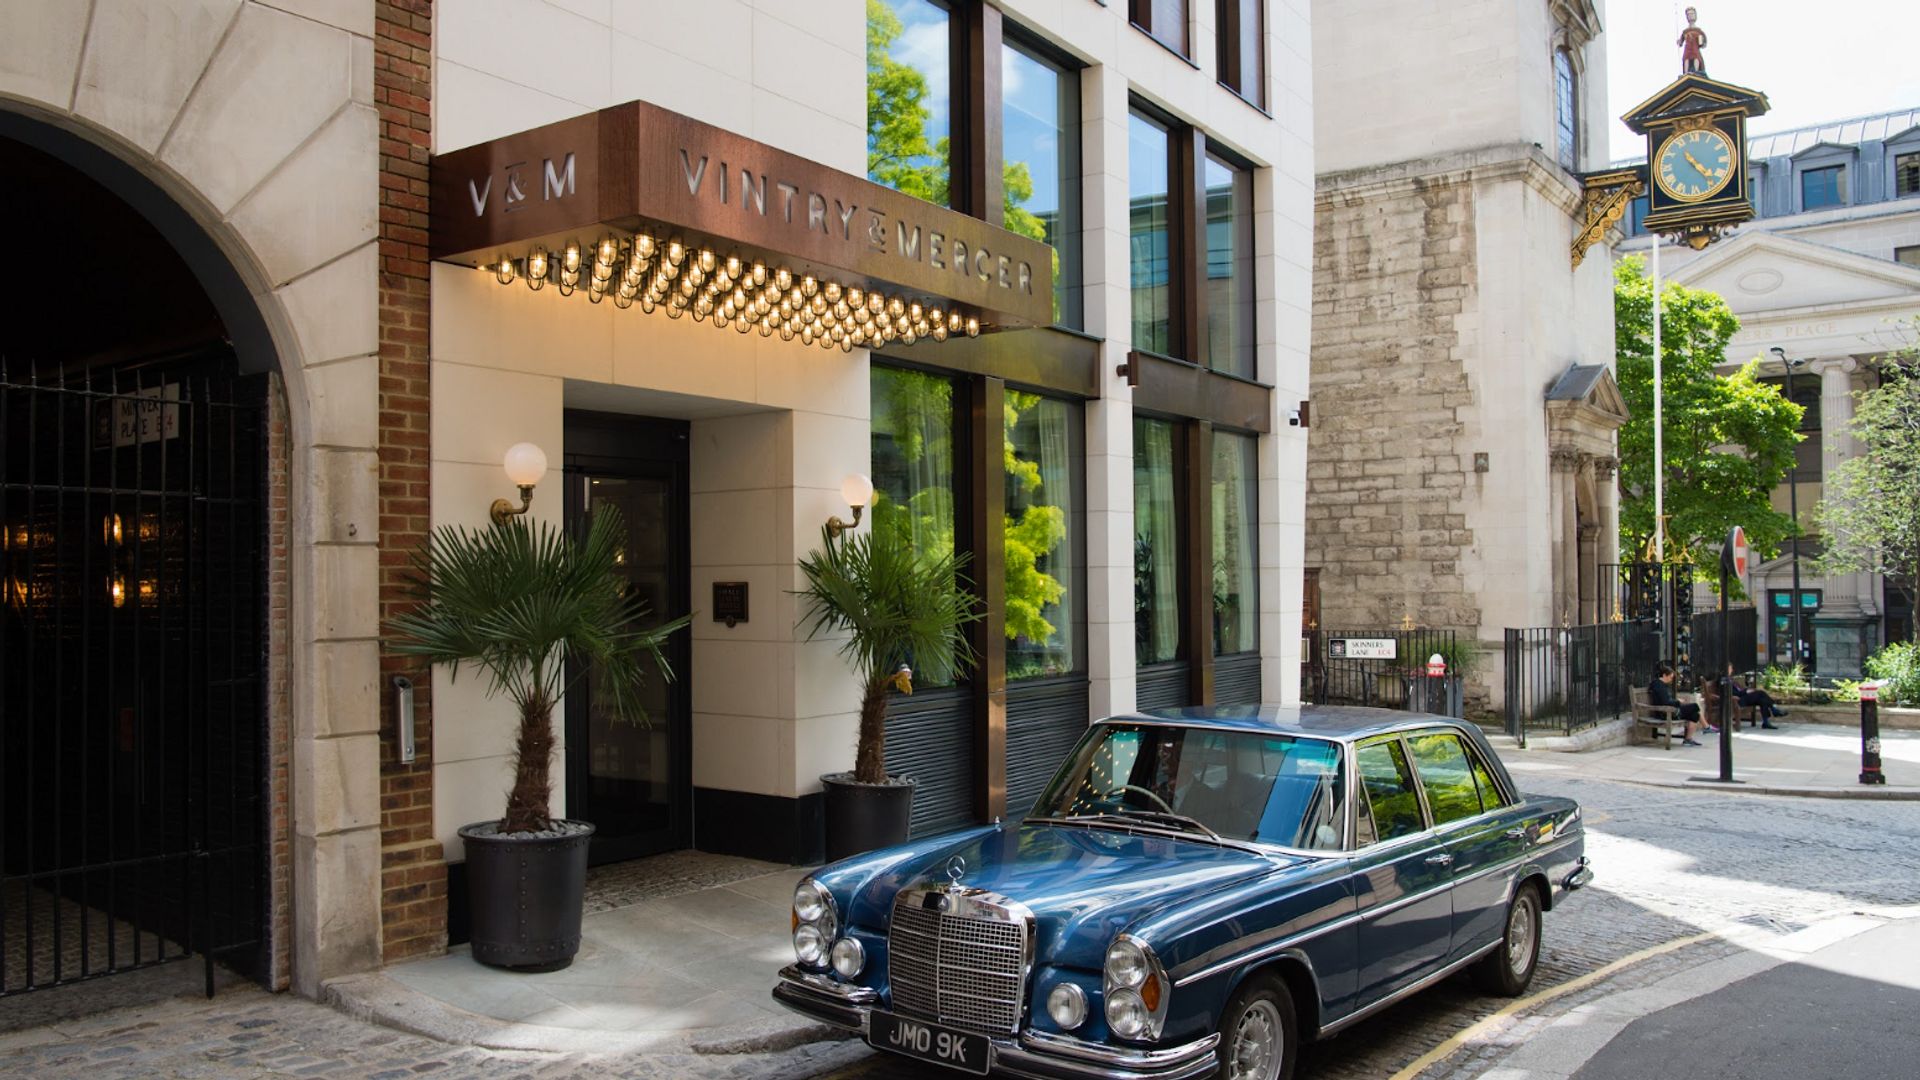 Vintry & Mercer is the affordable trendy London hotel you've been waiting for